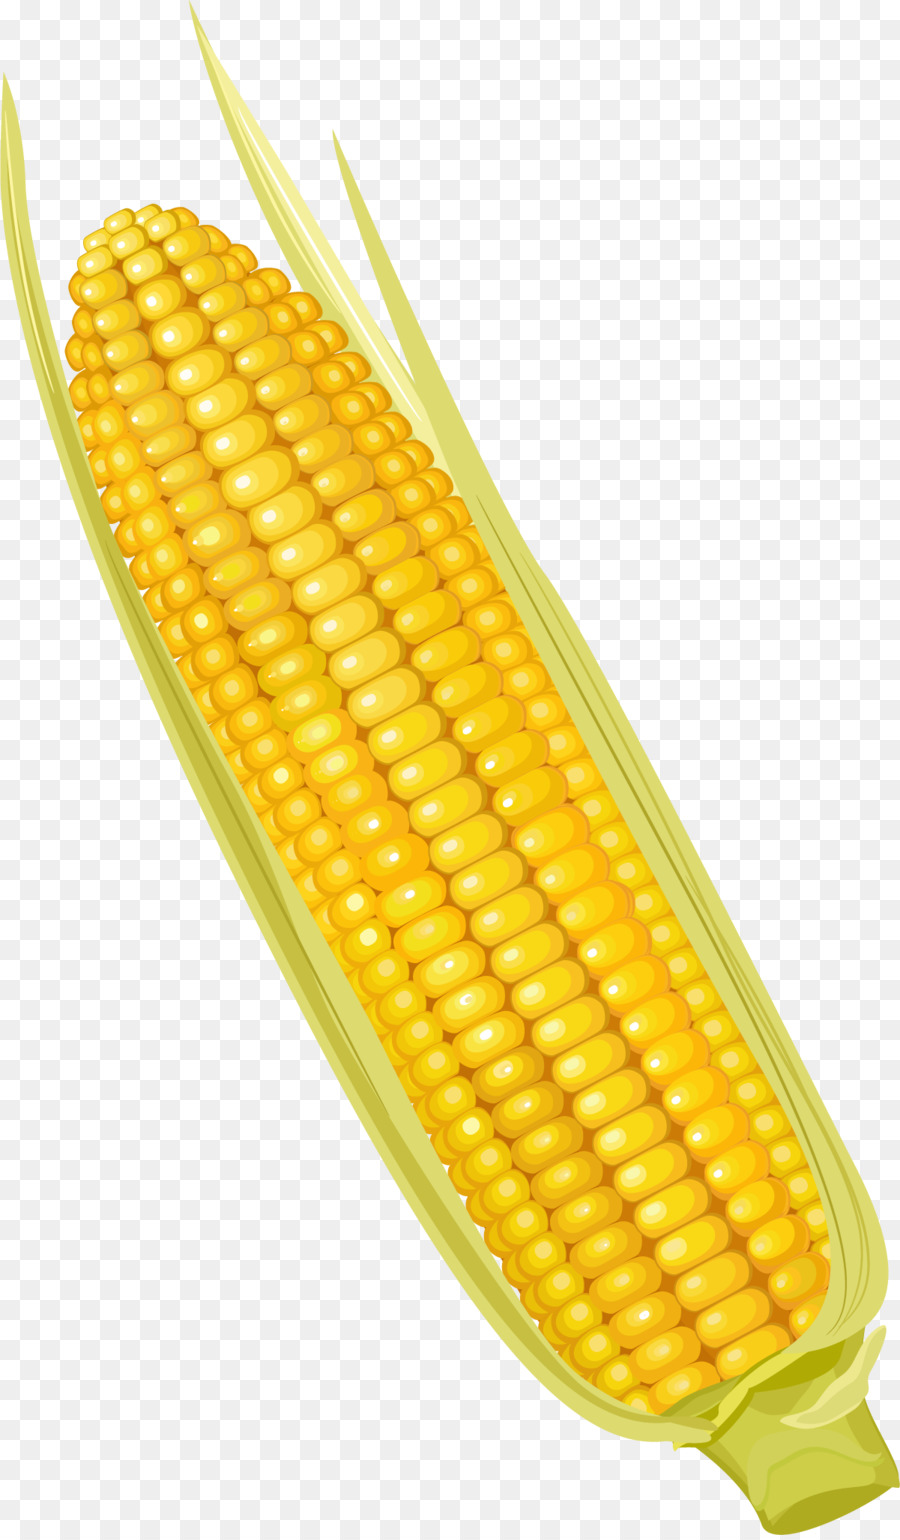 Corn on the cob Maize Corncob Vegetable - Cartoon yellow corn png download - 1201*2048 - Free Transparent Corn On The Cob png Download.